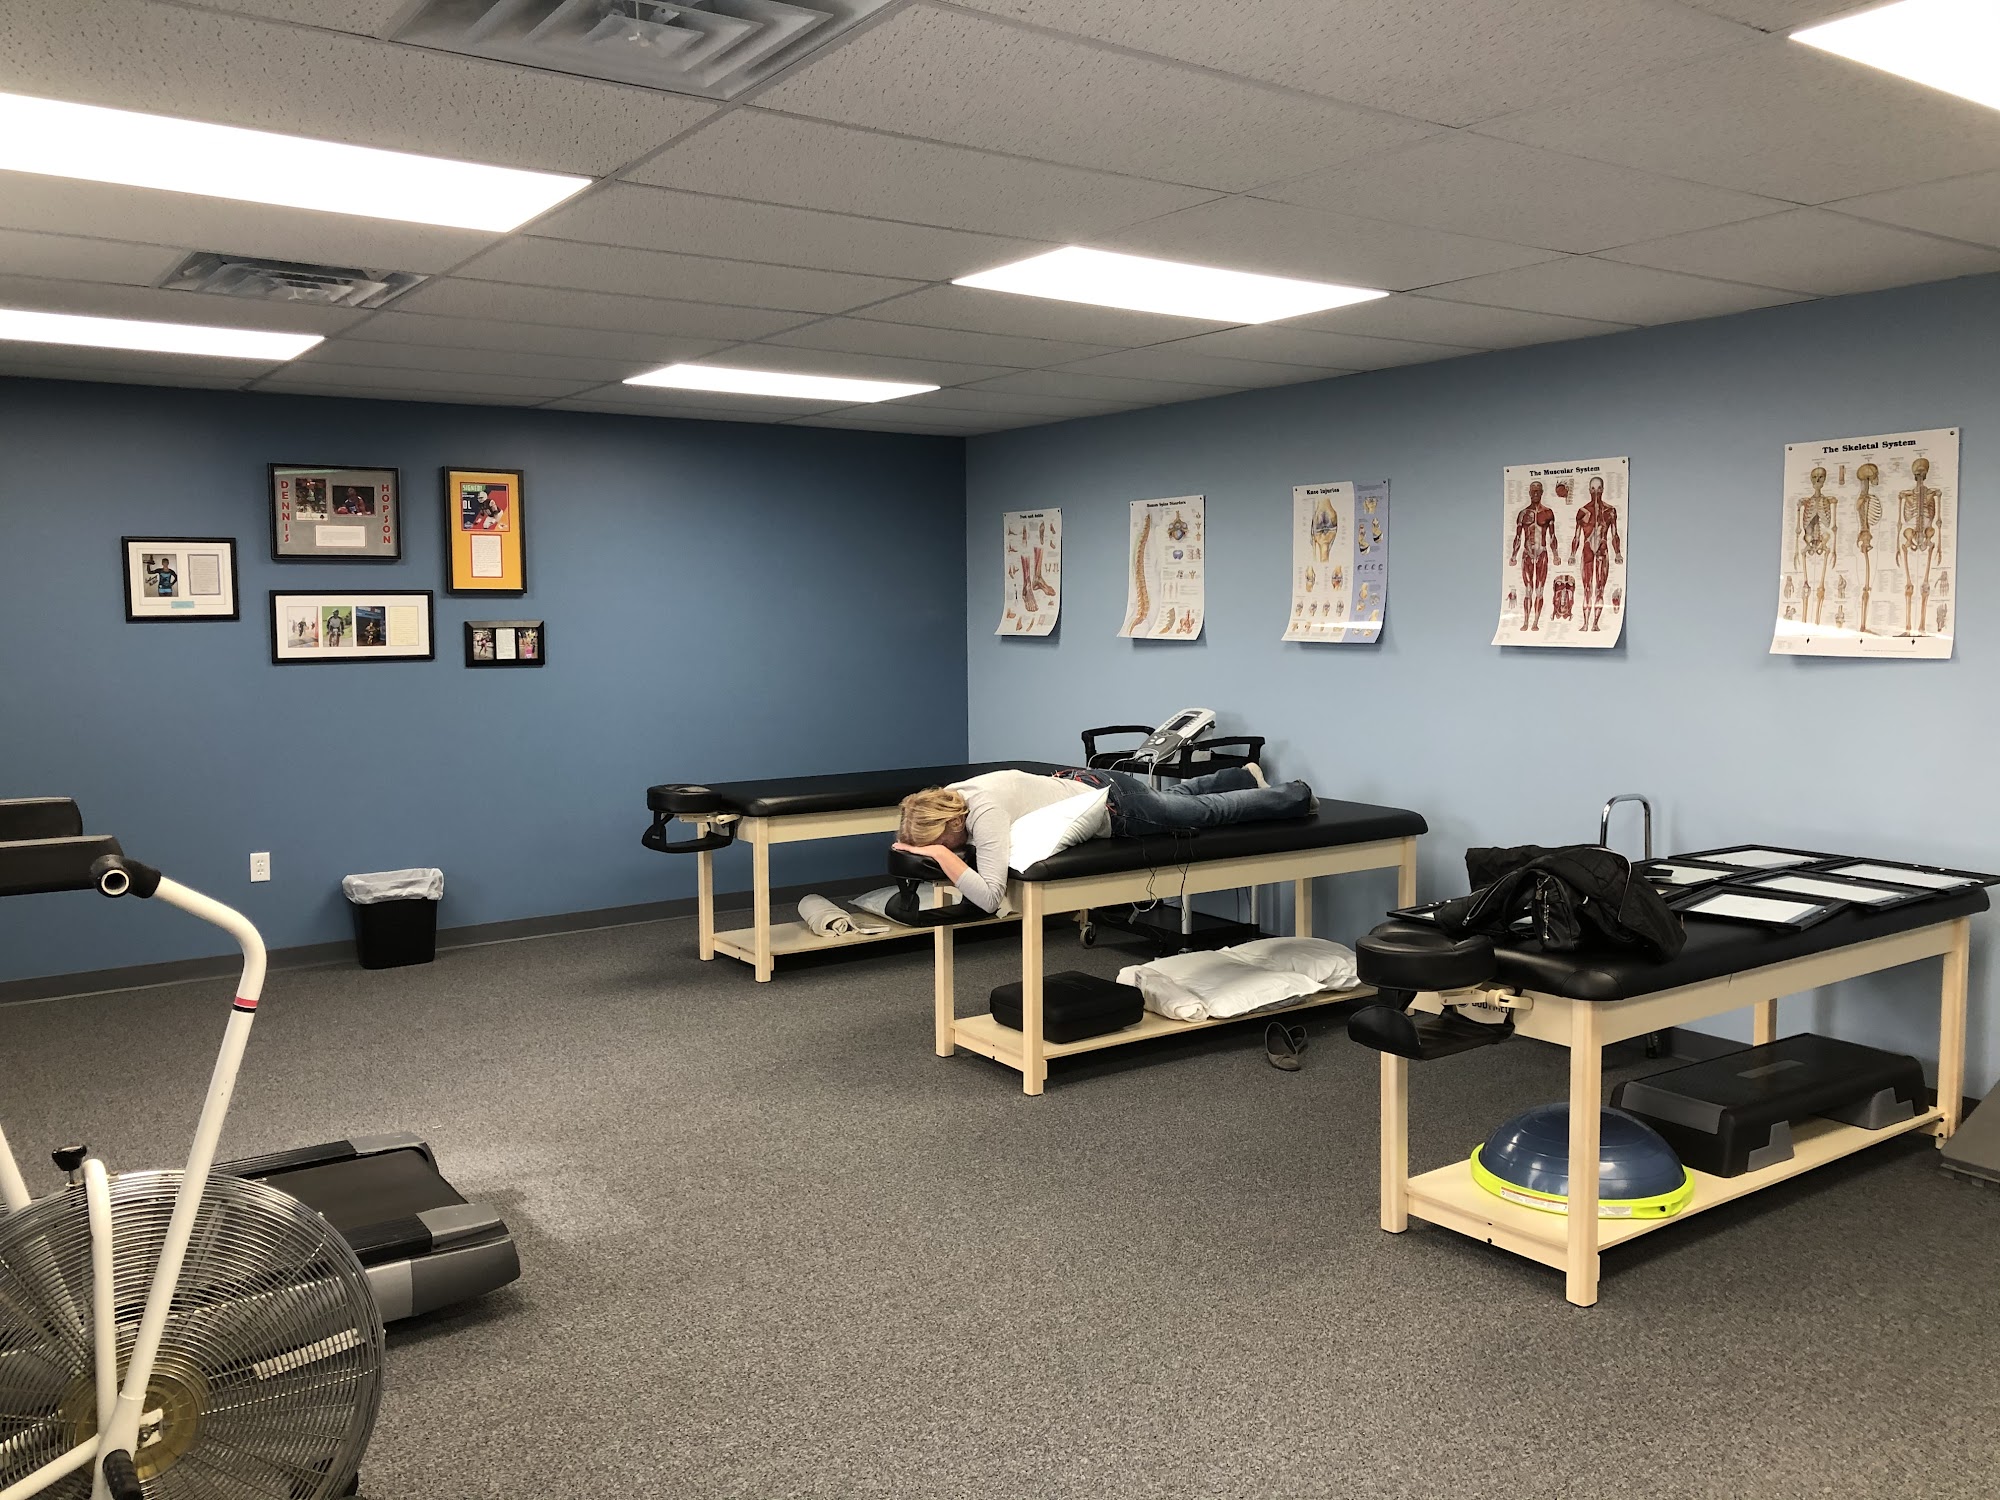 PT Link Physical Therapy - Oak Harbor 250 Townline St, Oak Harbor Ohio 43449